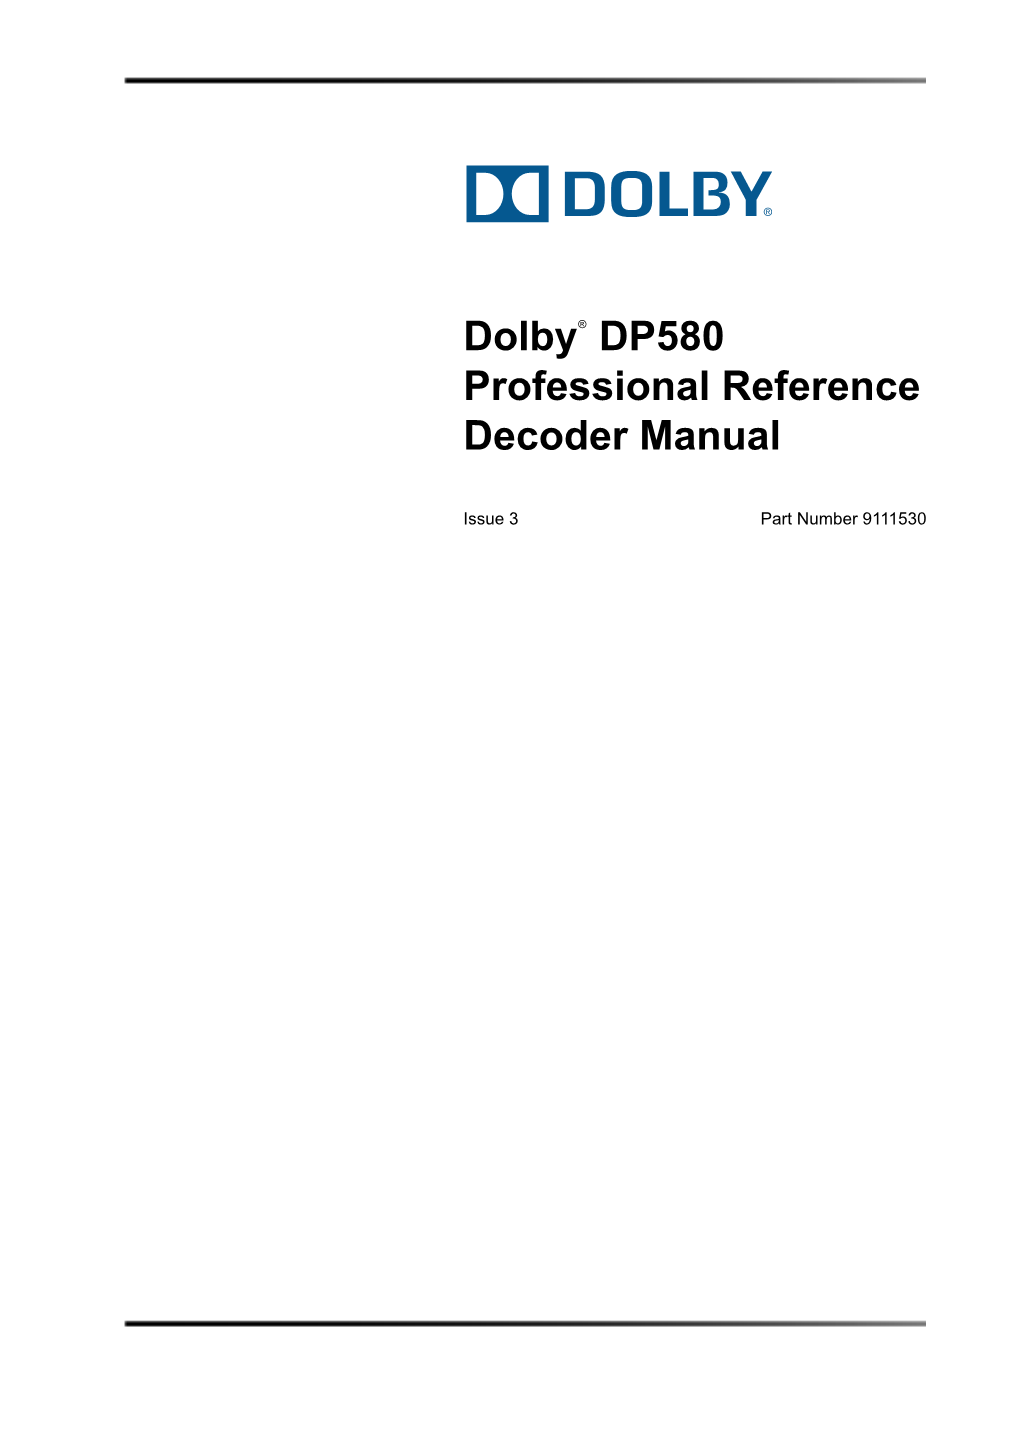 Dolby DP580 Professional Reference Decoder Manual